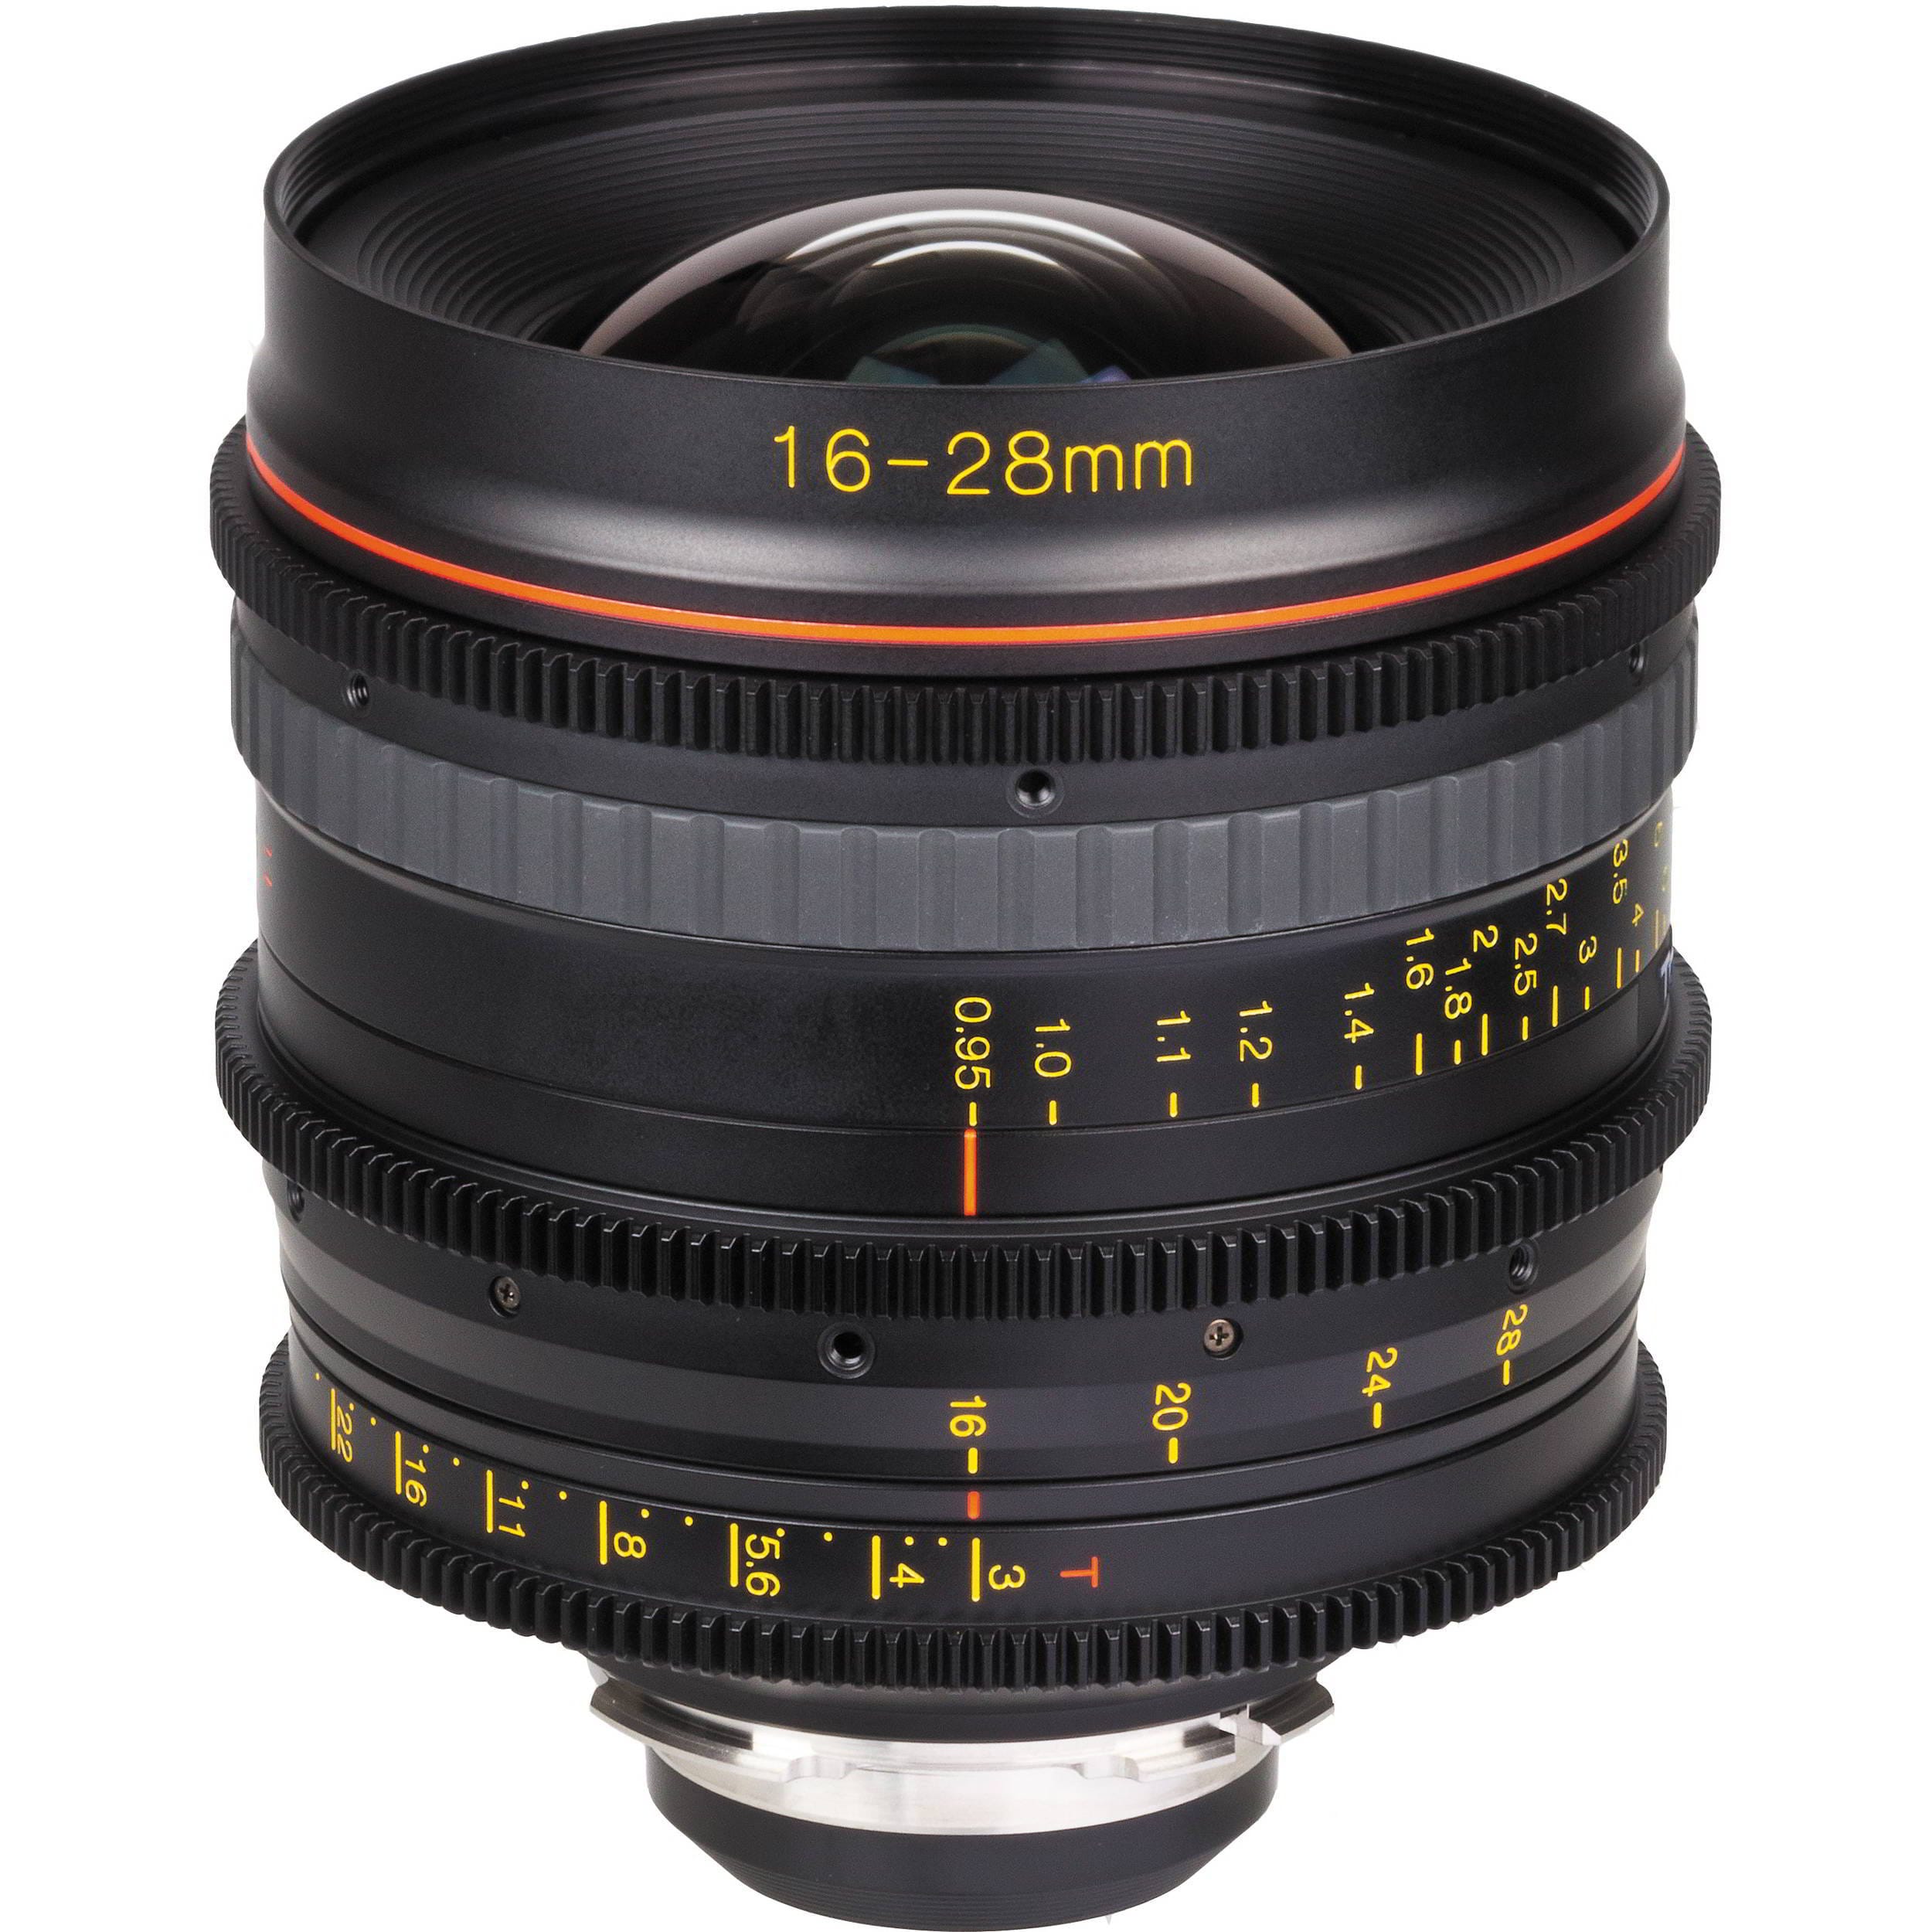 AT-X 16-28mm T3 CANON